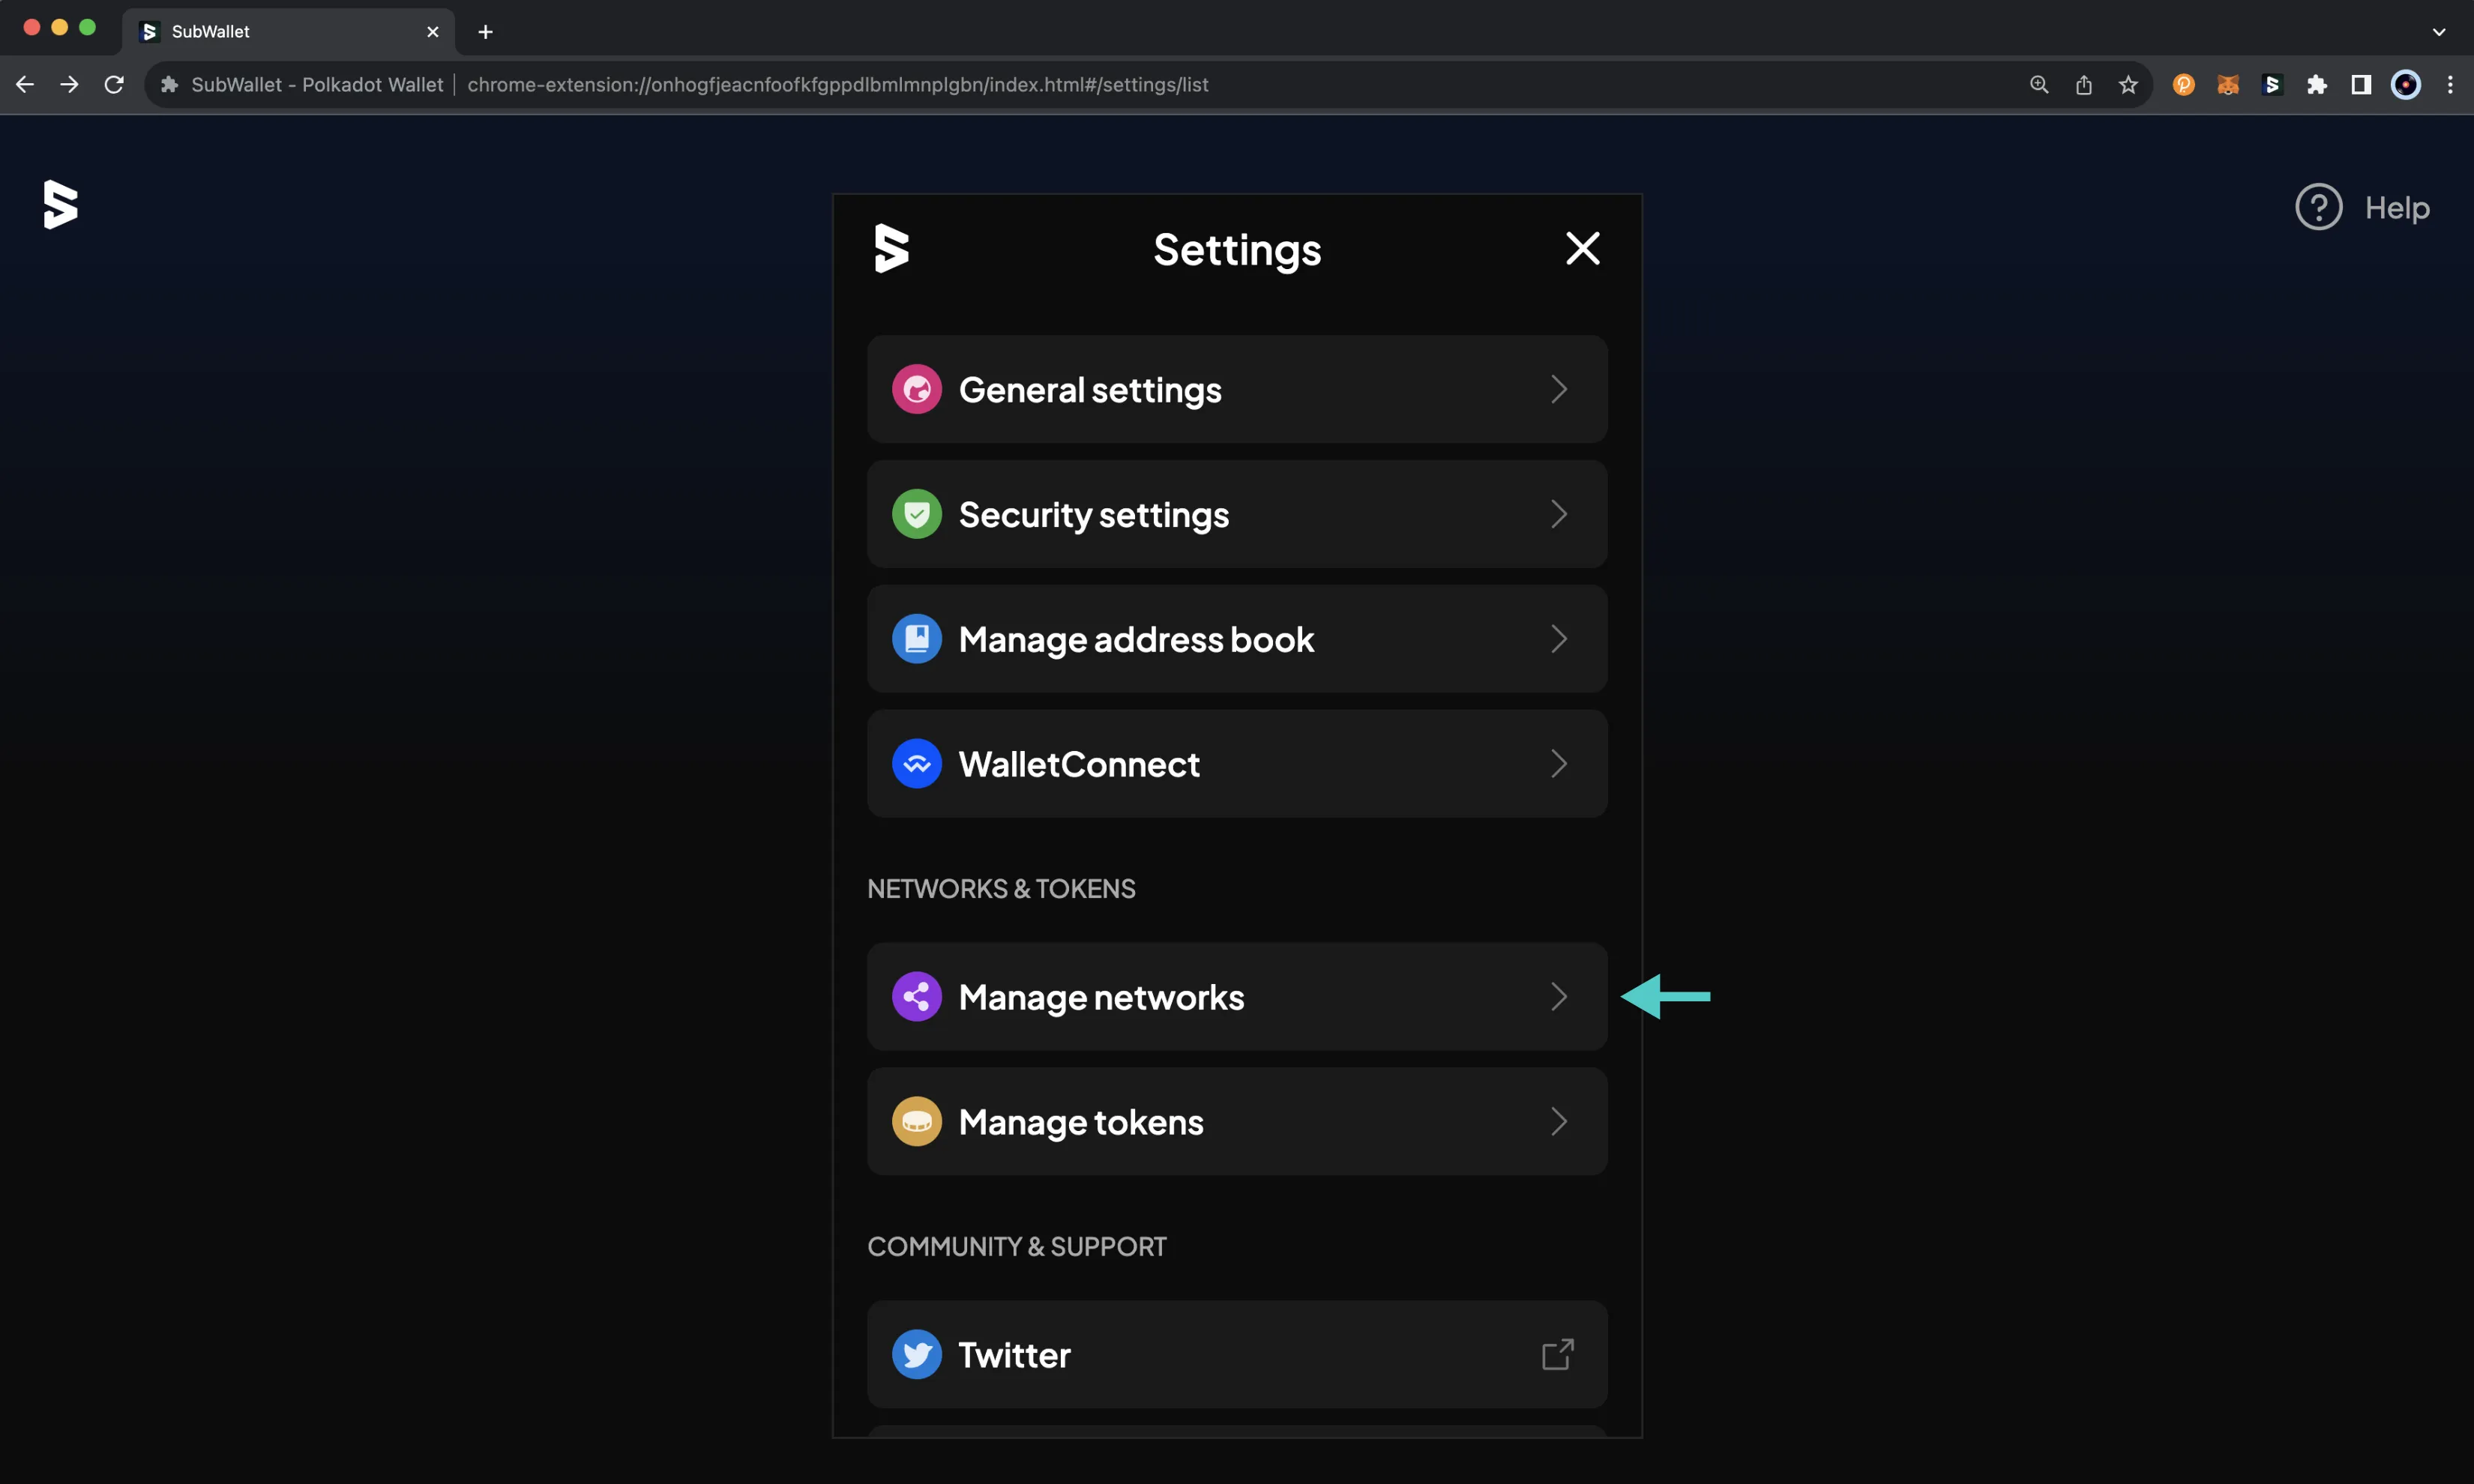 The settings screen on the SubWallet browser extension.